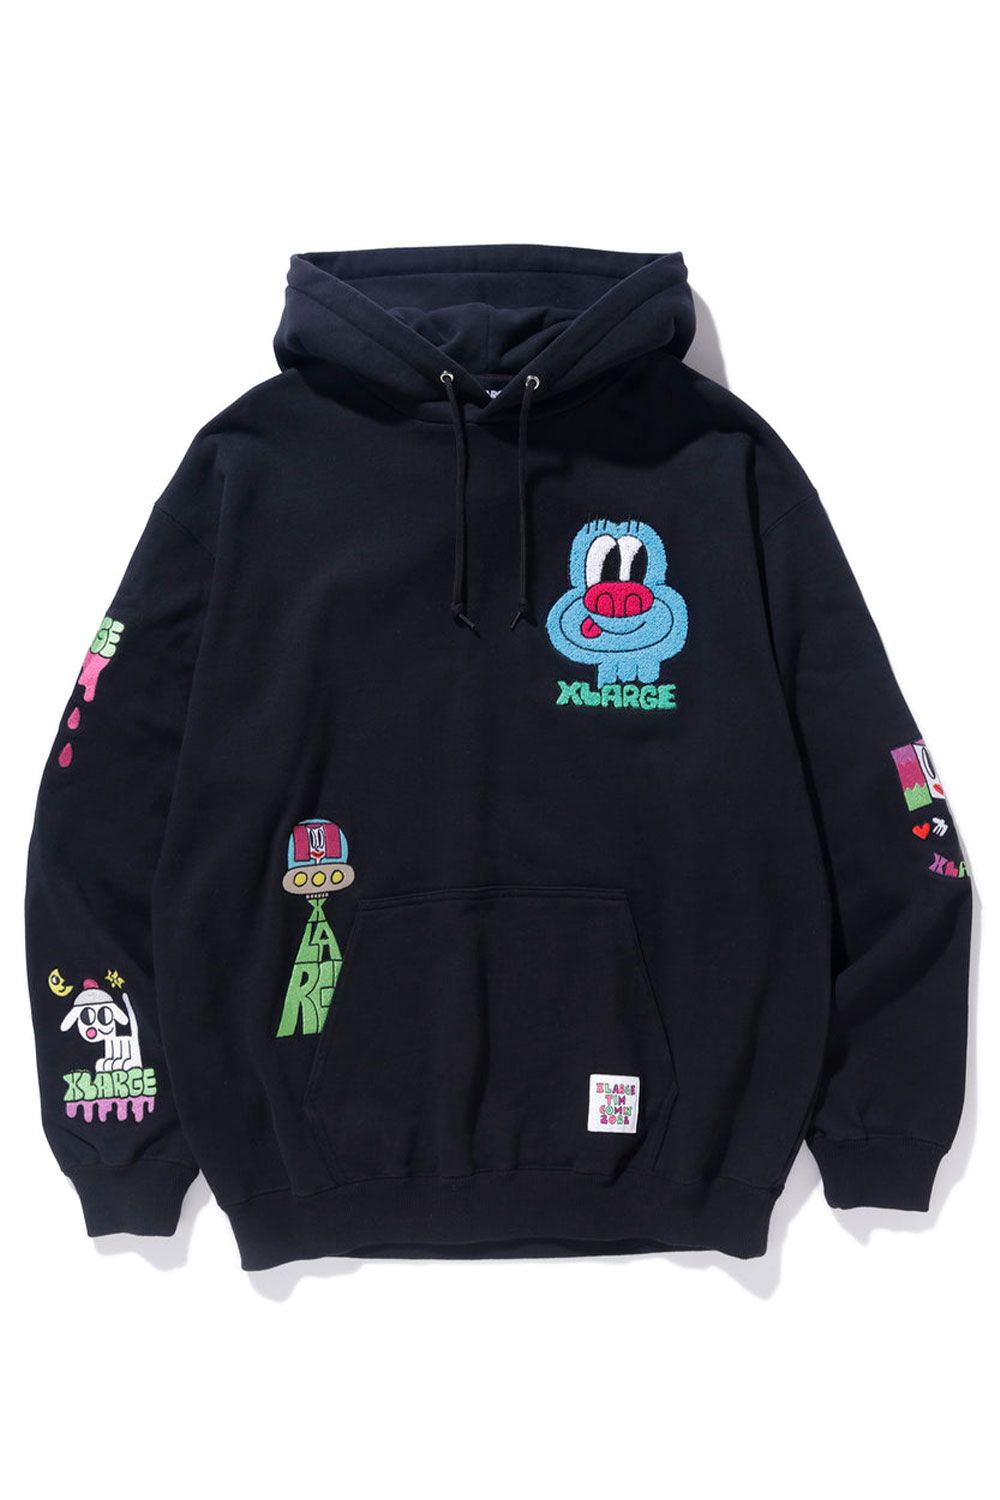 XLARGE - TIM COMIX CHENILLE EMBROIDERED HOODED SWEAT / アッシュ 